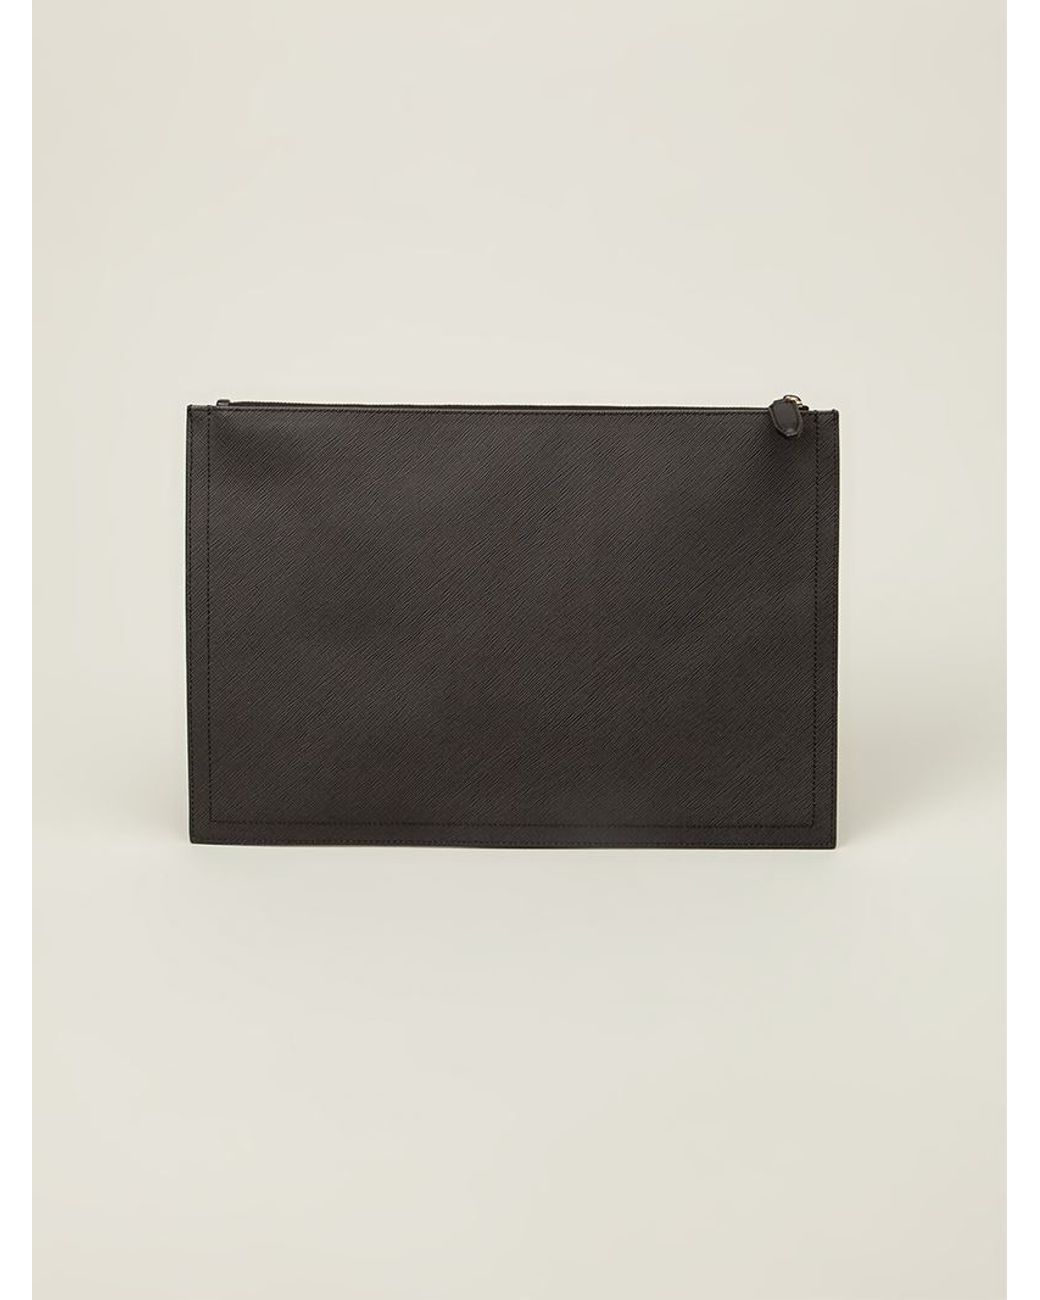 Givenchy 'Favelas 74' Clutch in Black | Lyst UK